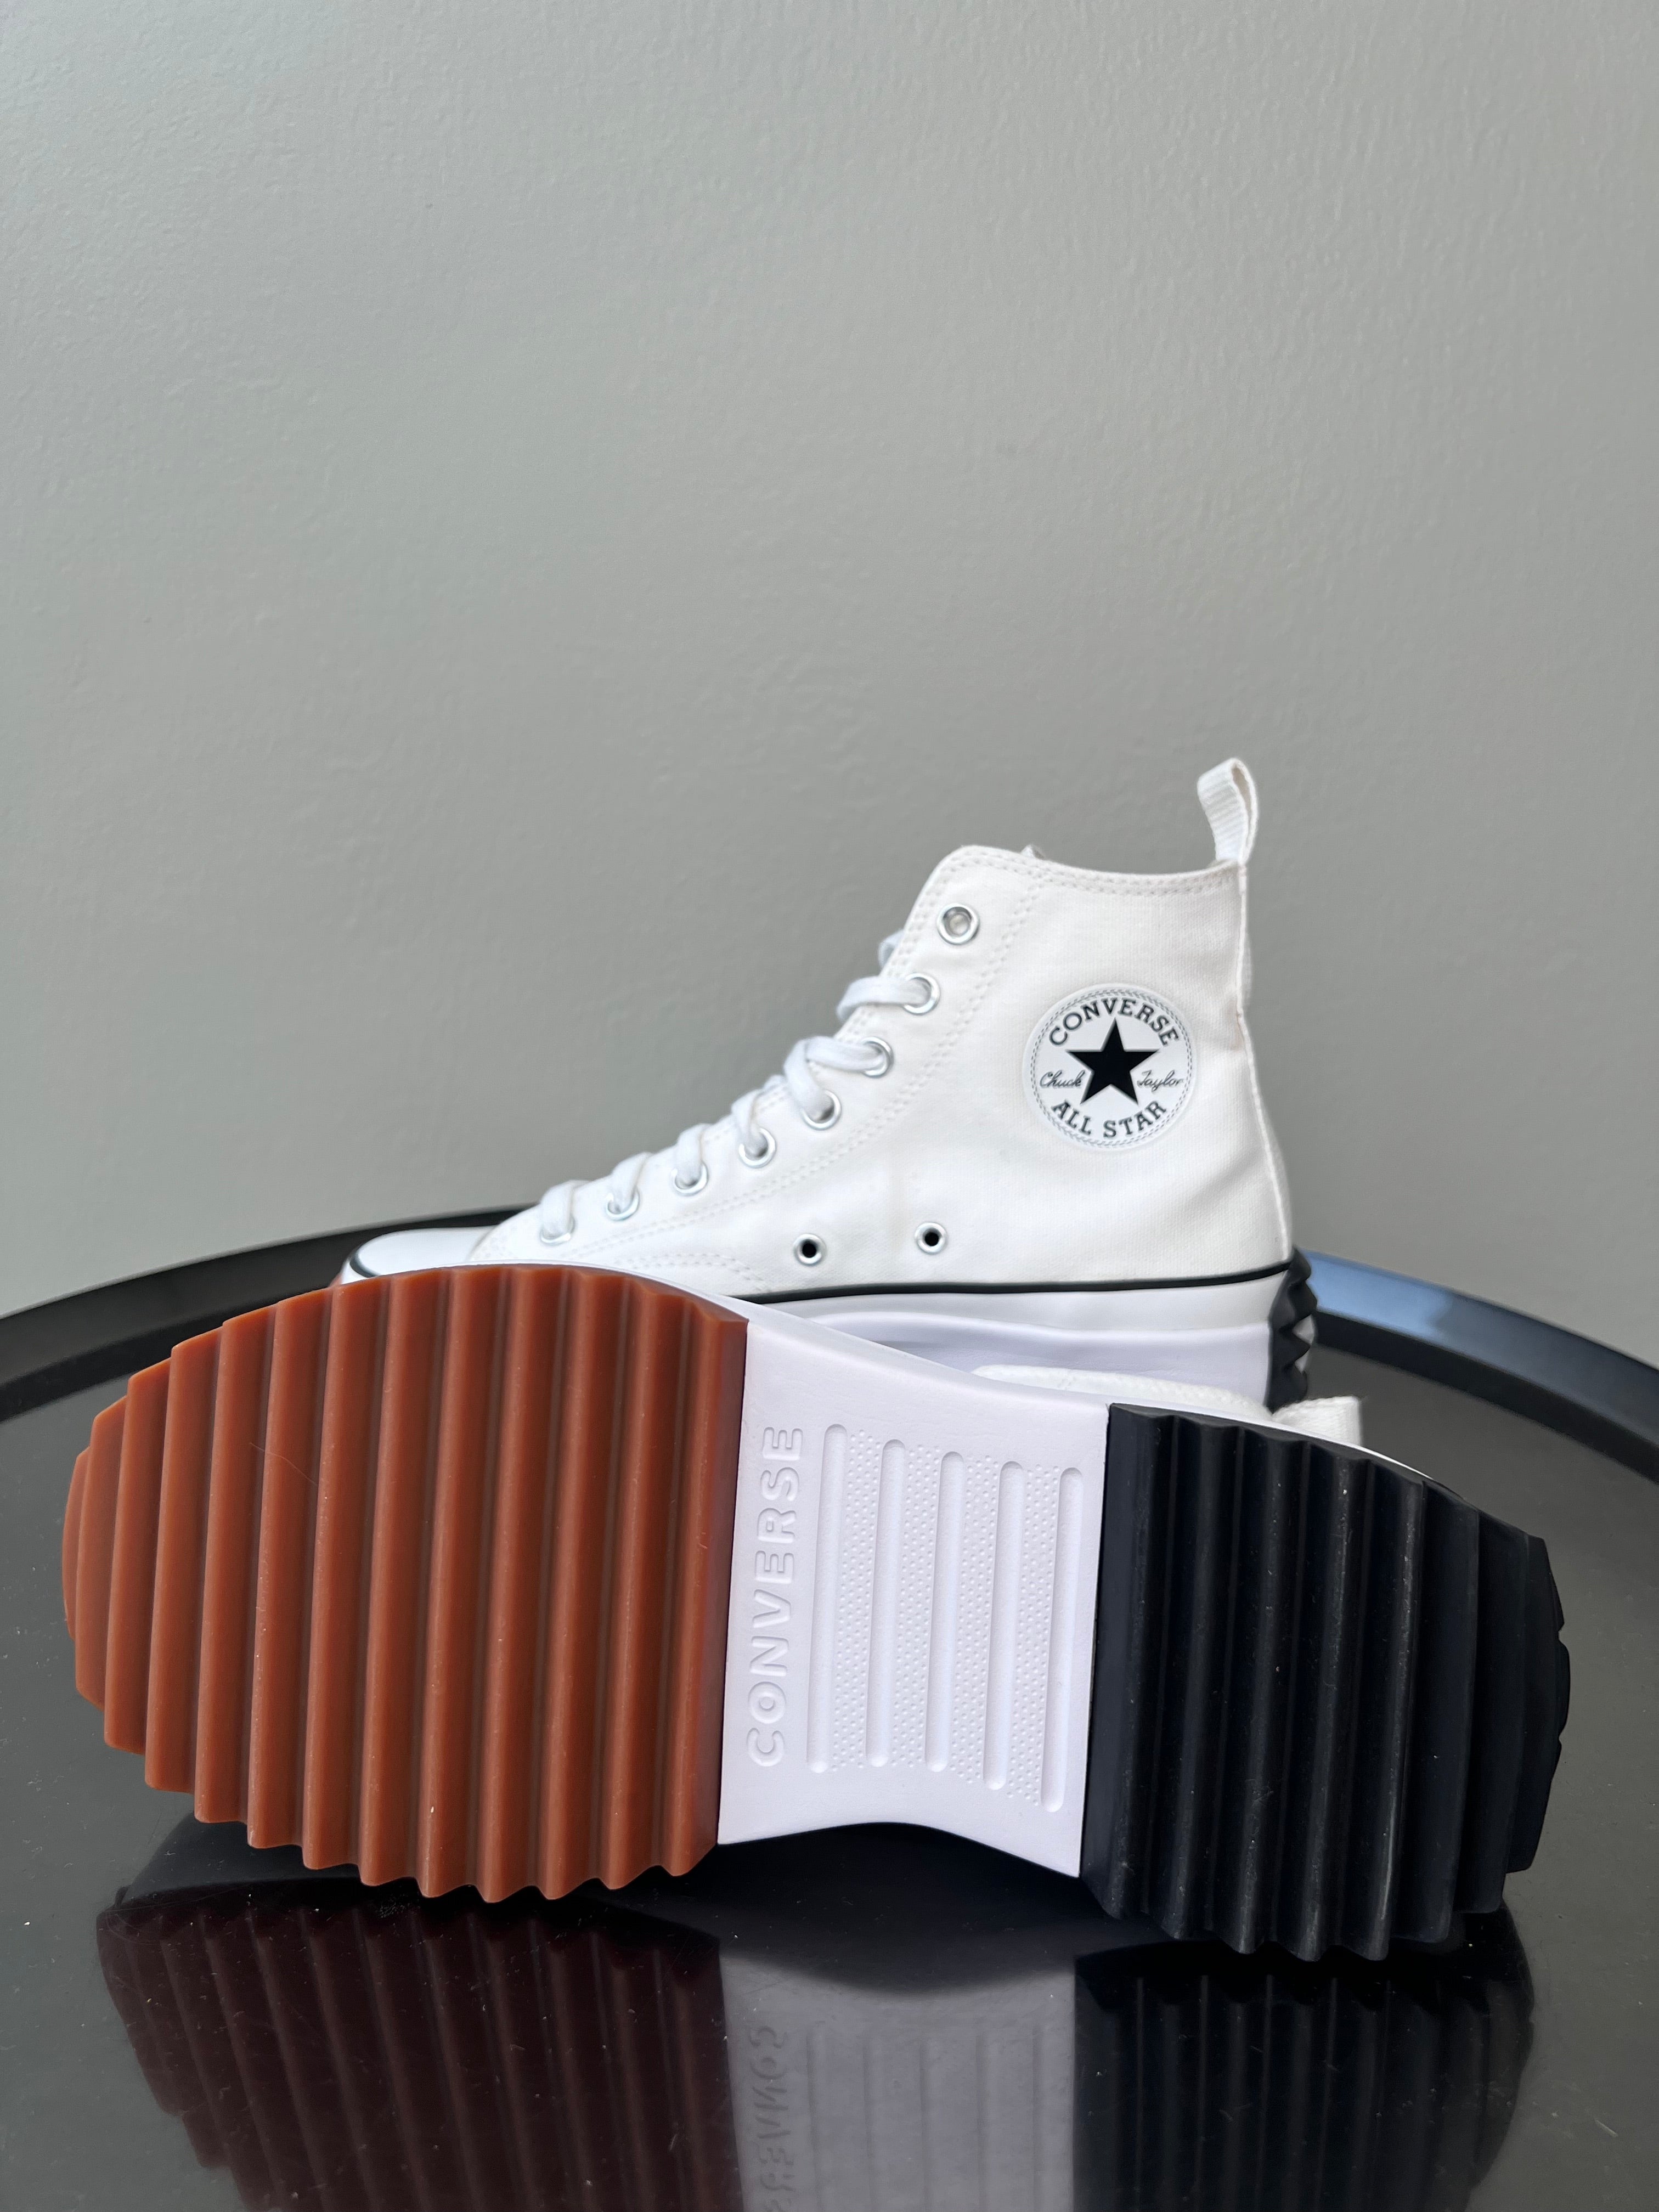 White sneakers with black & brown platform - CONVERSE